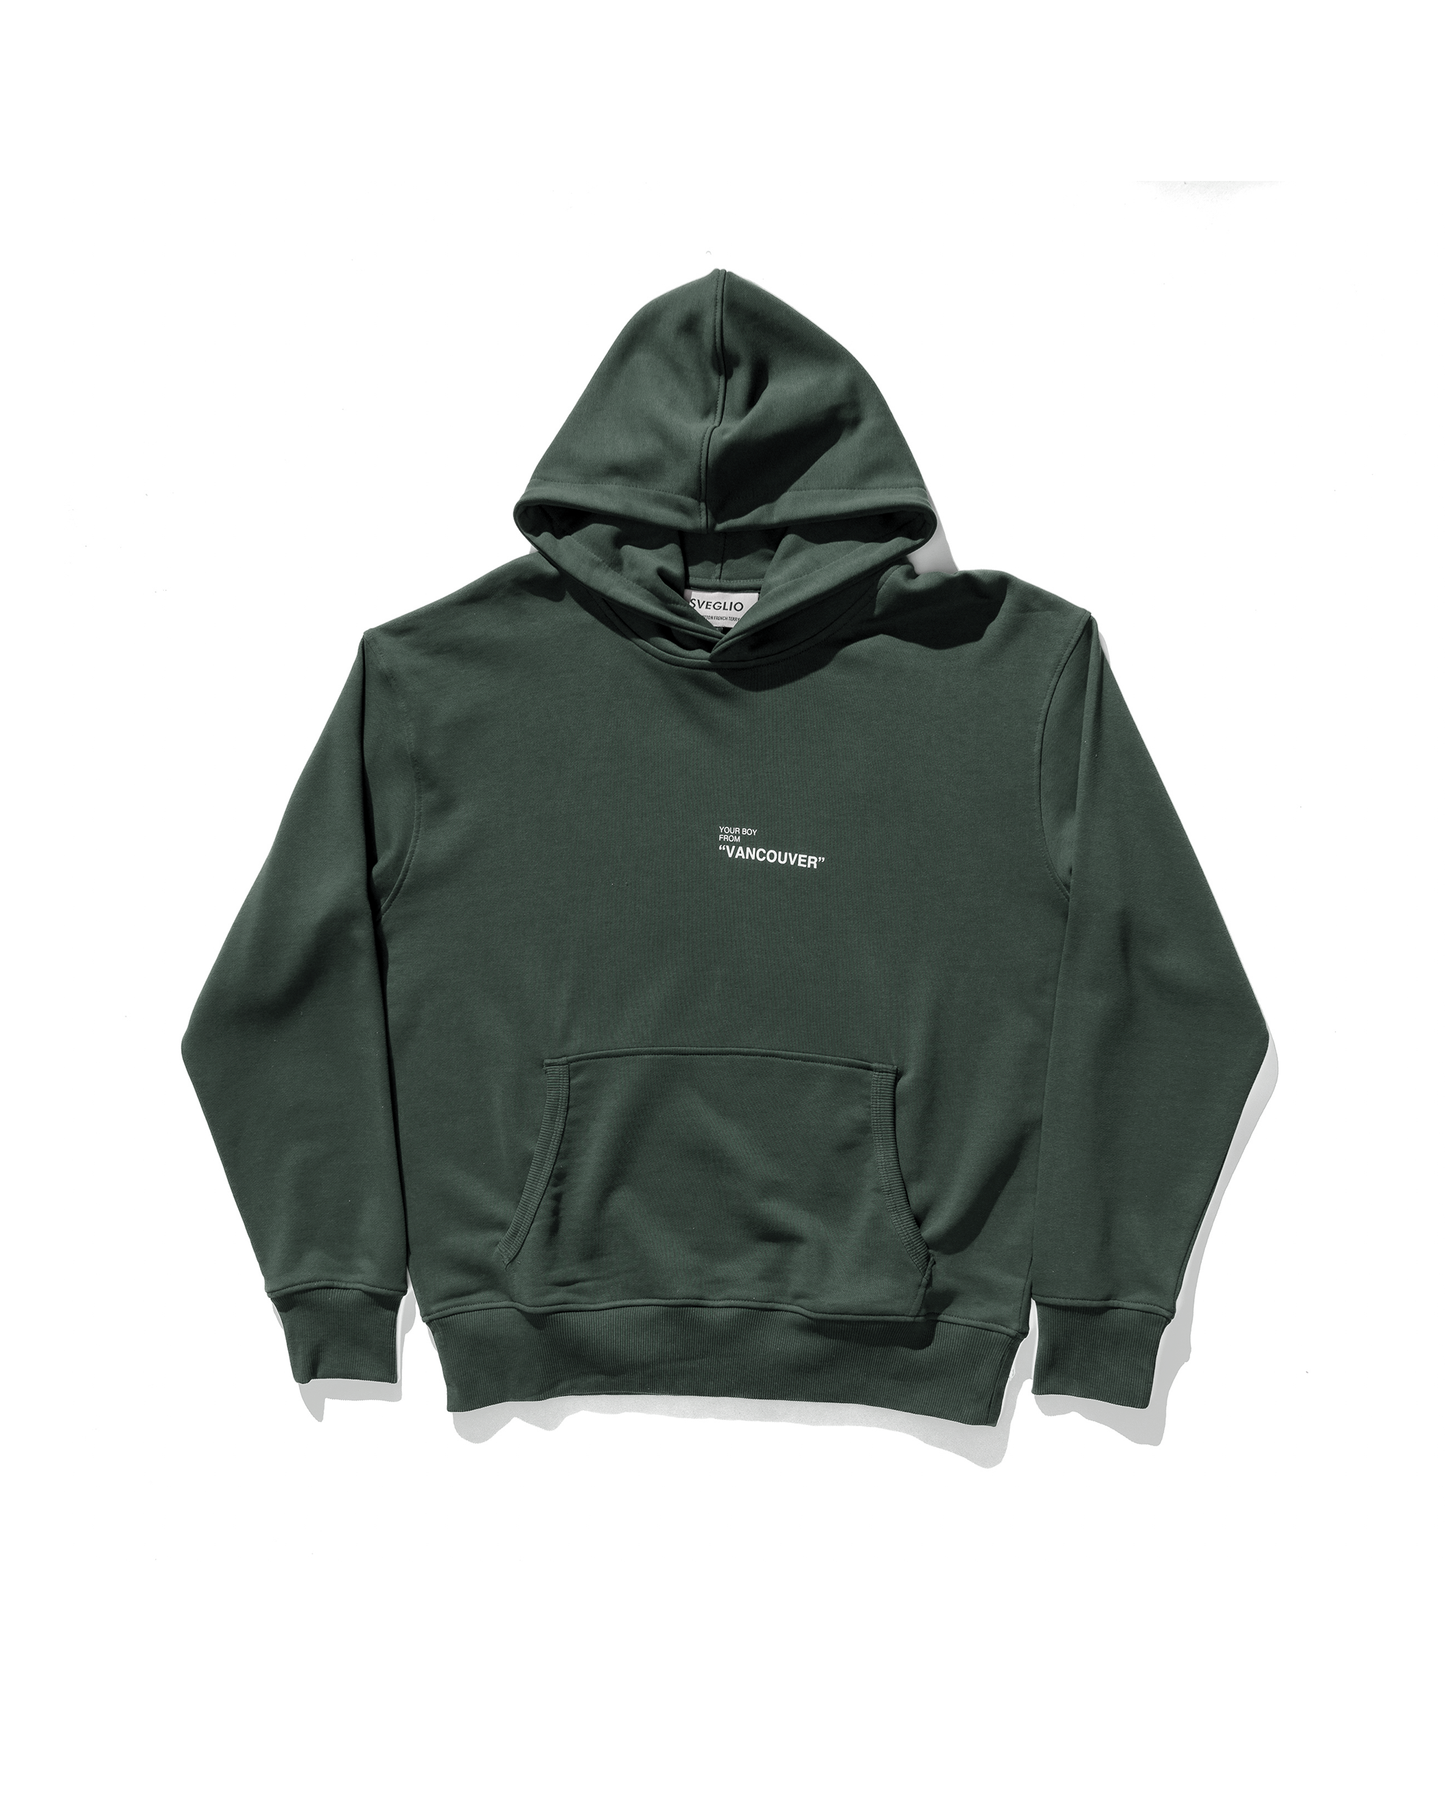 Your Boy from Vancouver Hoodie - Agave Green